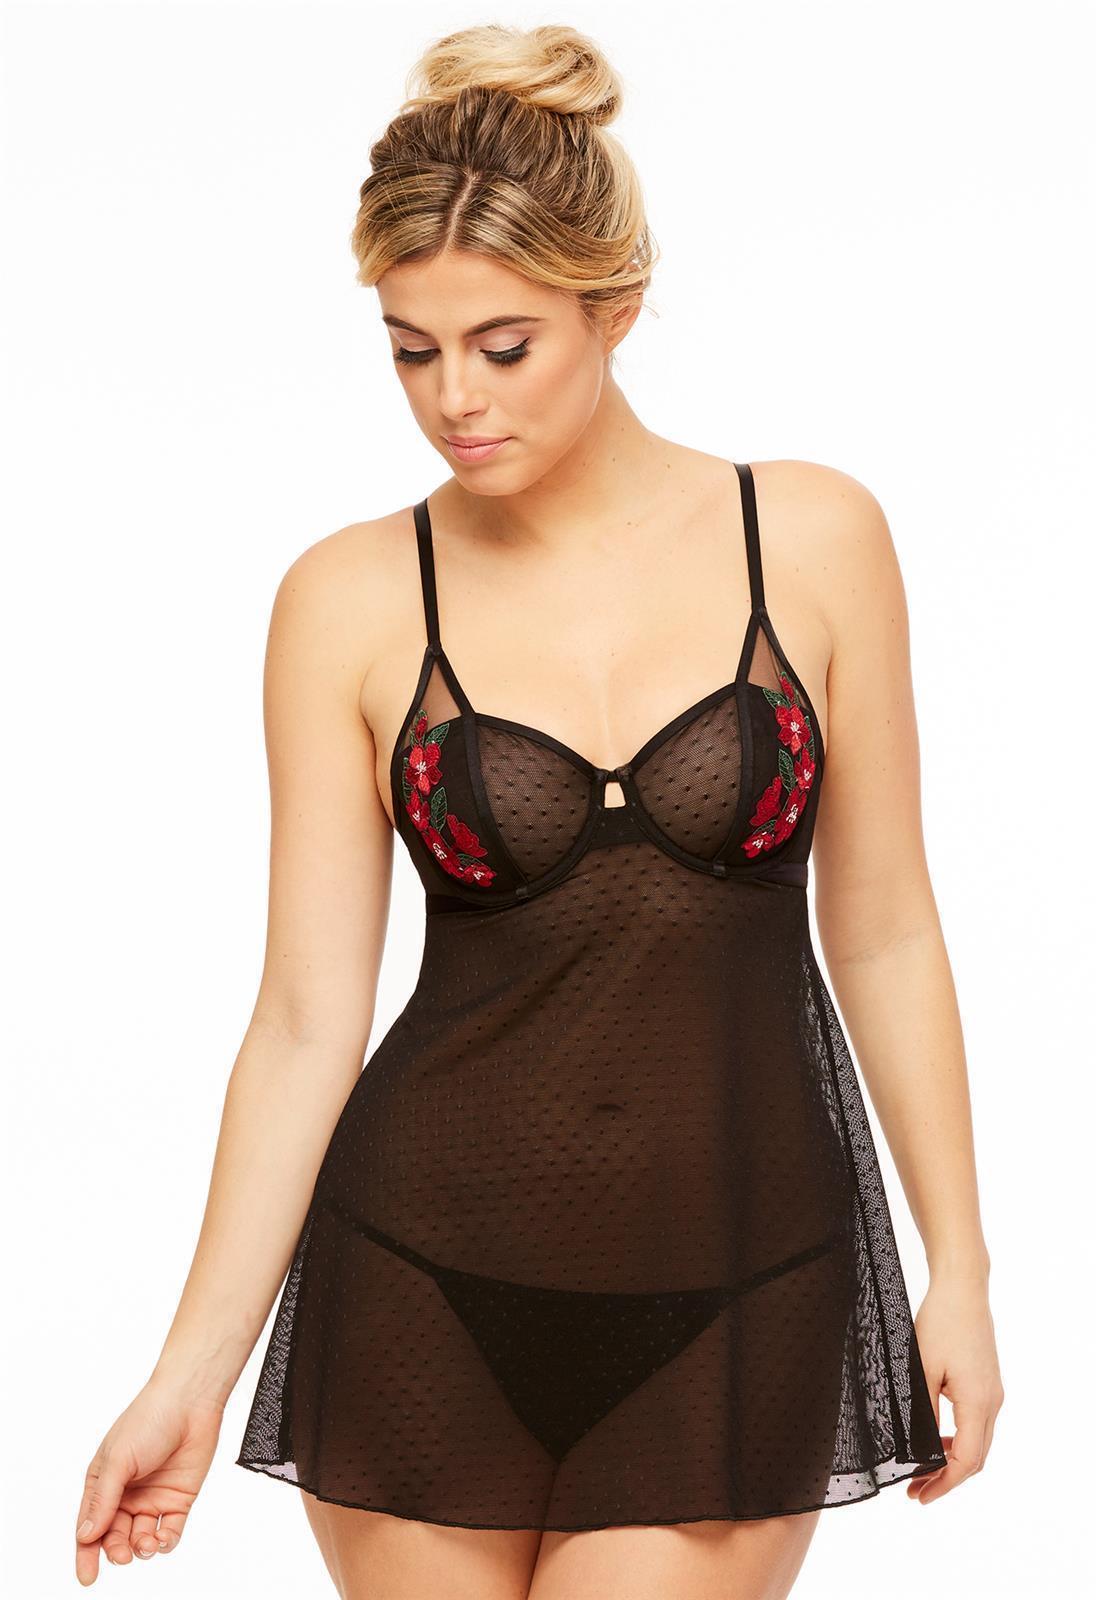 Where to Buy Cheap Lingerie Online - Stay at Home Mum